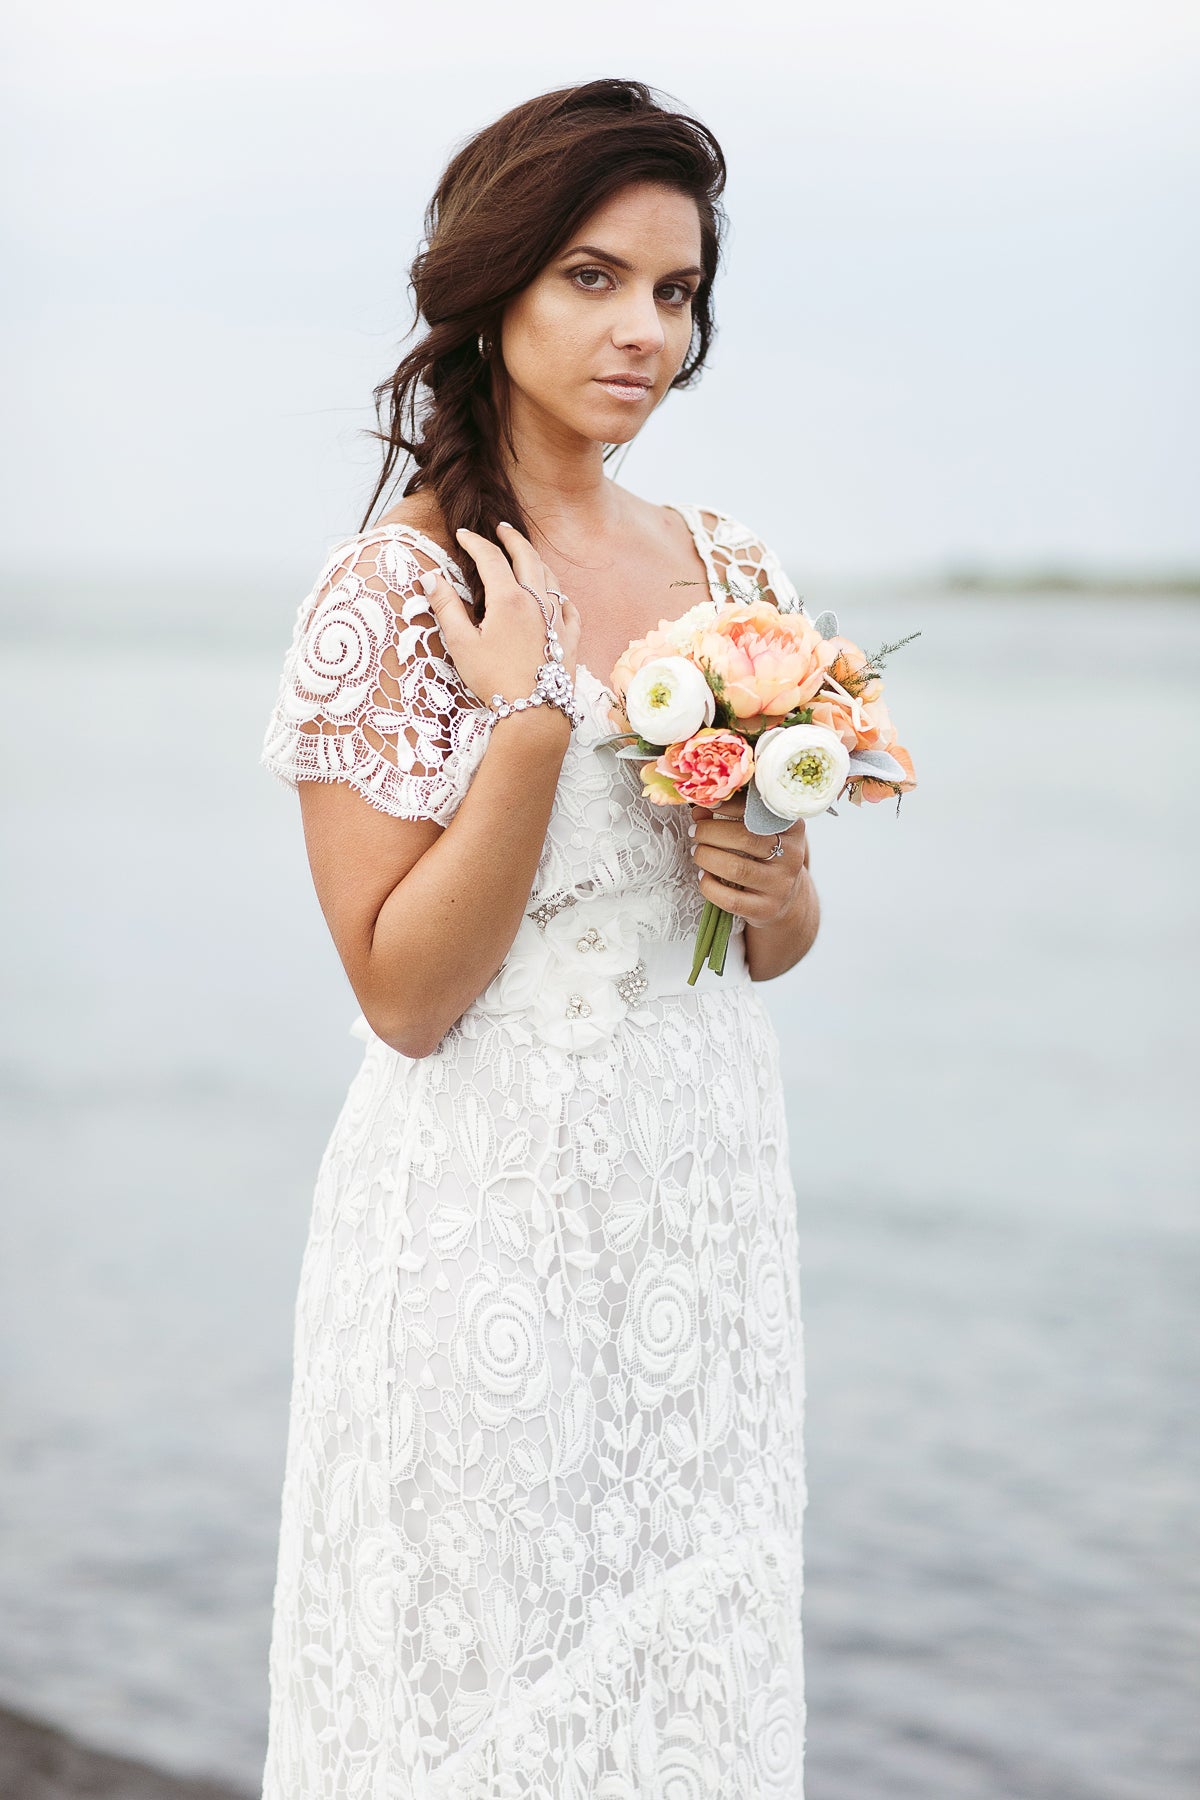 Bridal Flowers for the beach